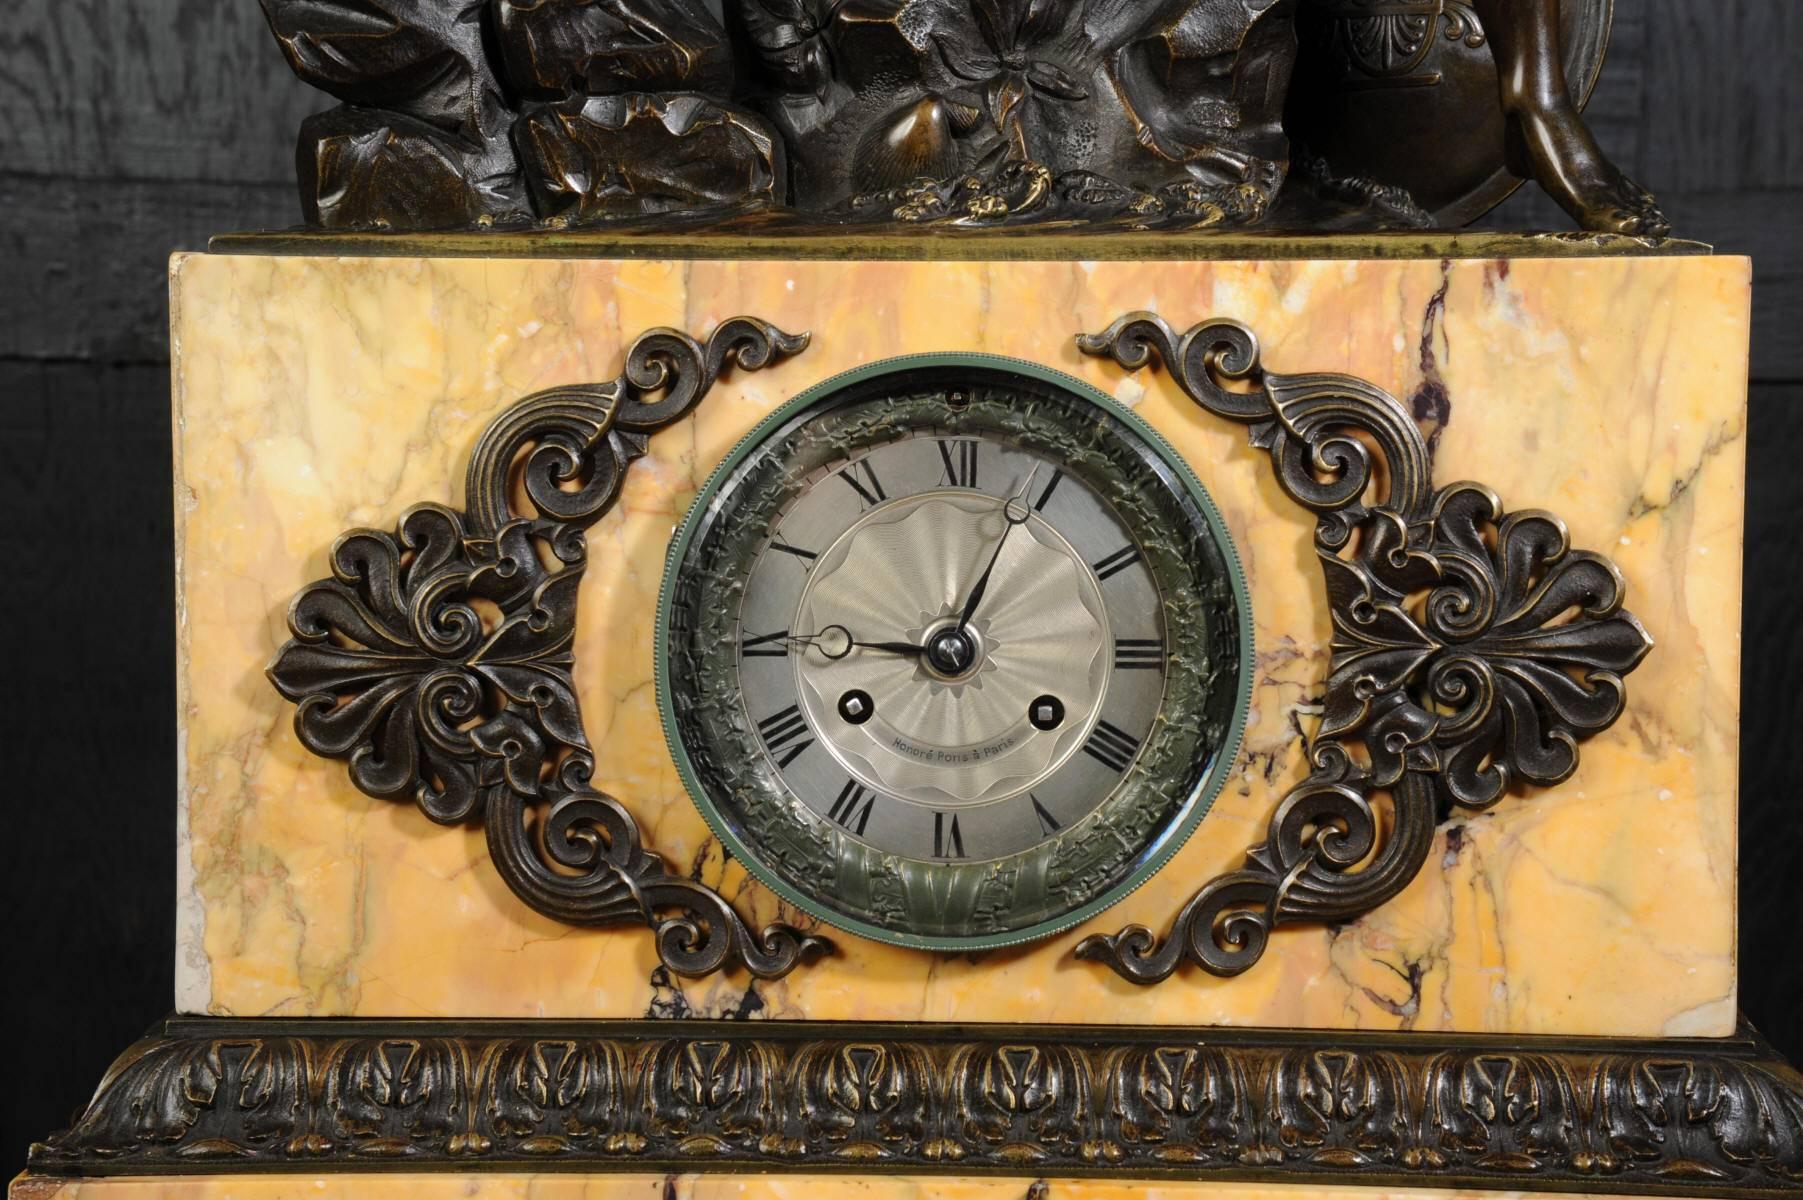 Patinated Agamemnon, Greek Hero of the Trojan War, Fine and Early Bronze Clock